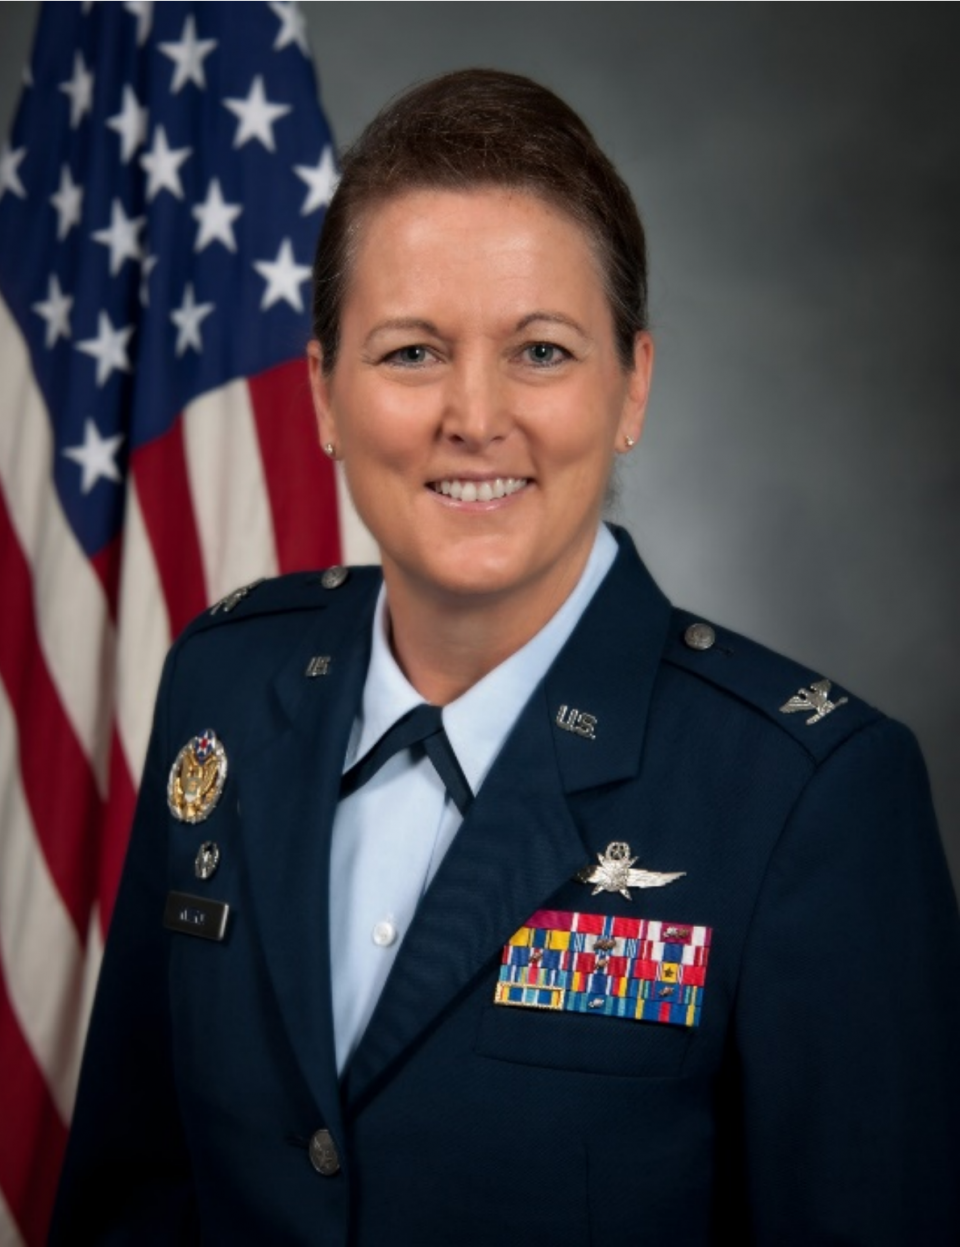 Air Force Reserve Officer Training Corps Commander Col Tammy M. Knierim